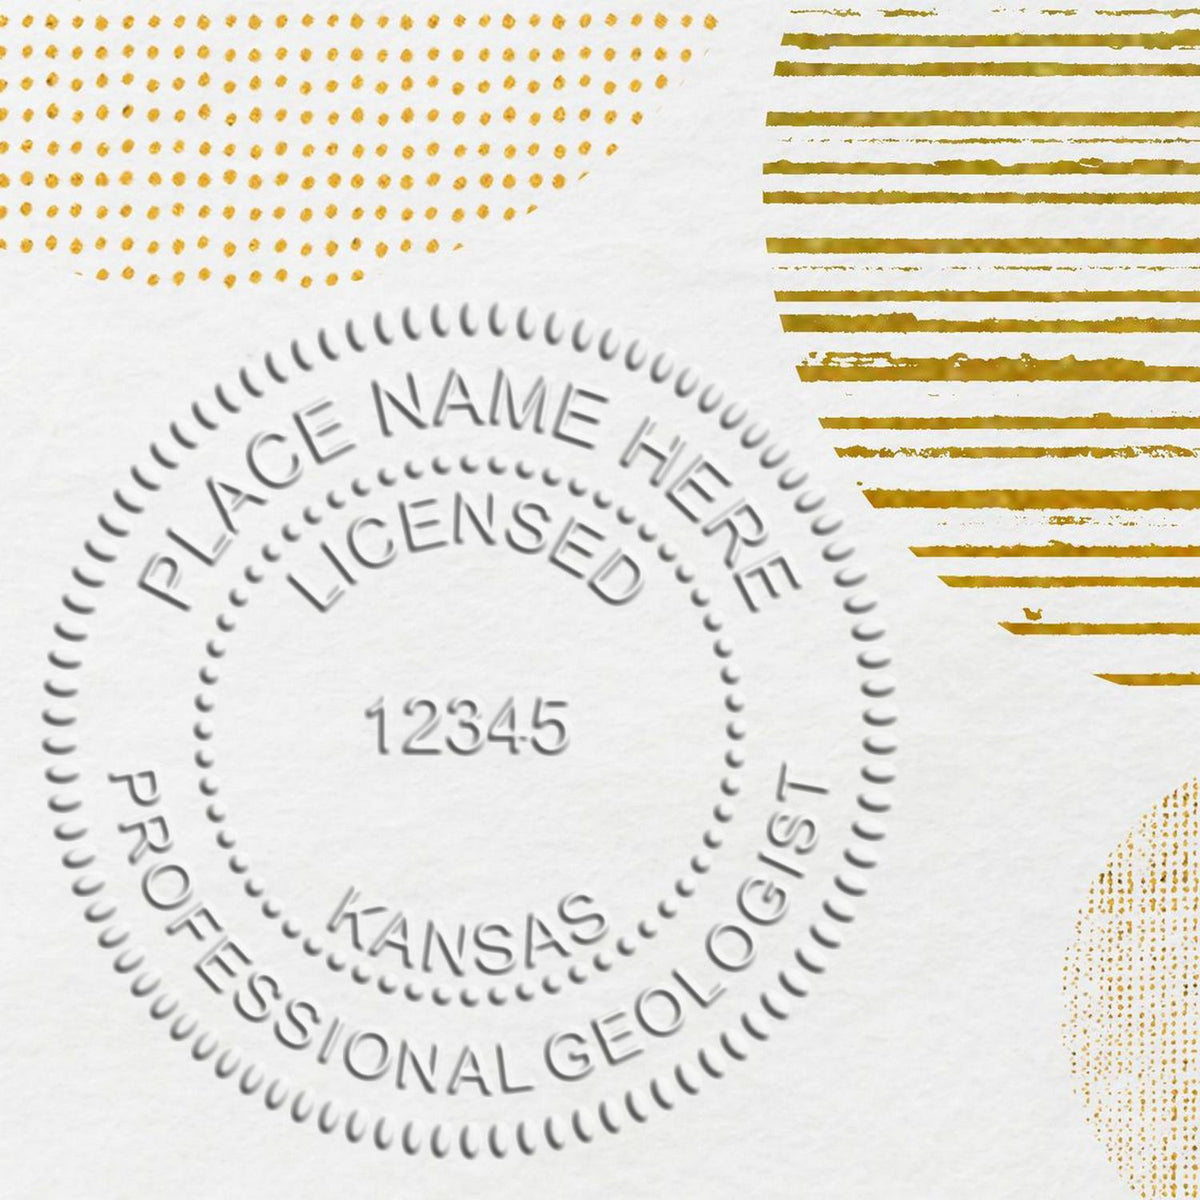 This paper is stamped with a sample imprint of the Long Reach Kansas Geology Seal, signifying its quality and reliability.